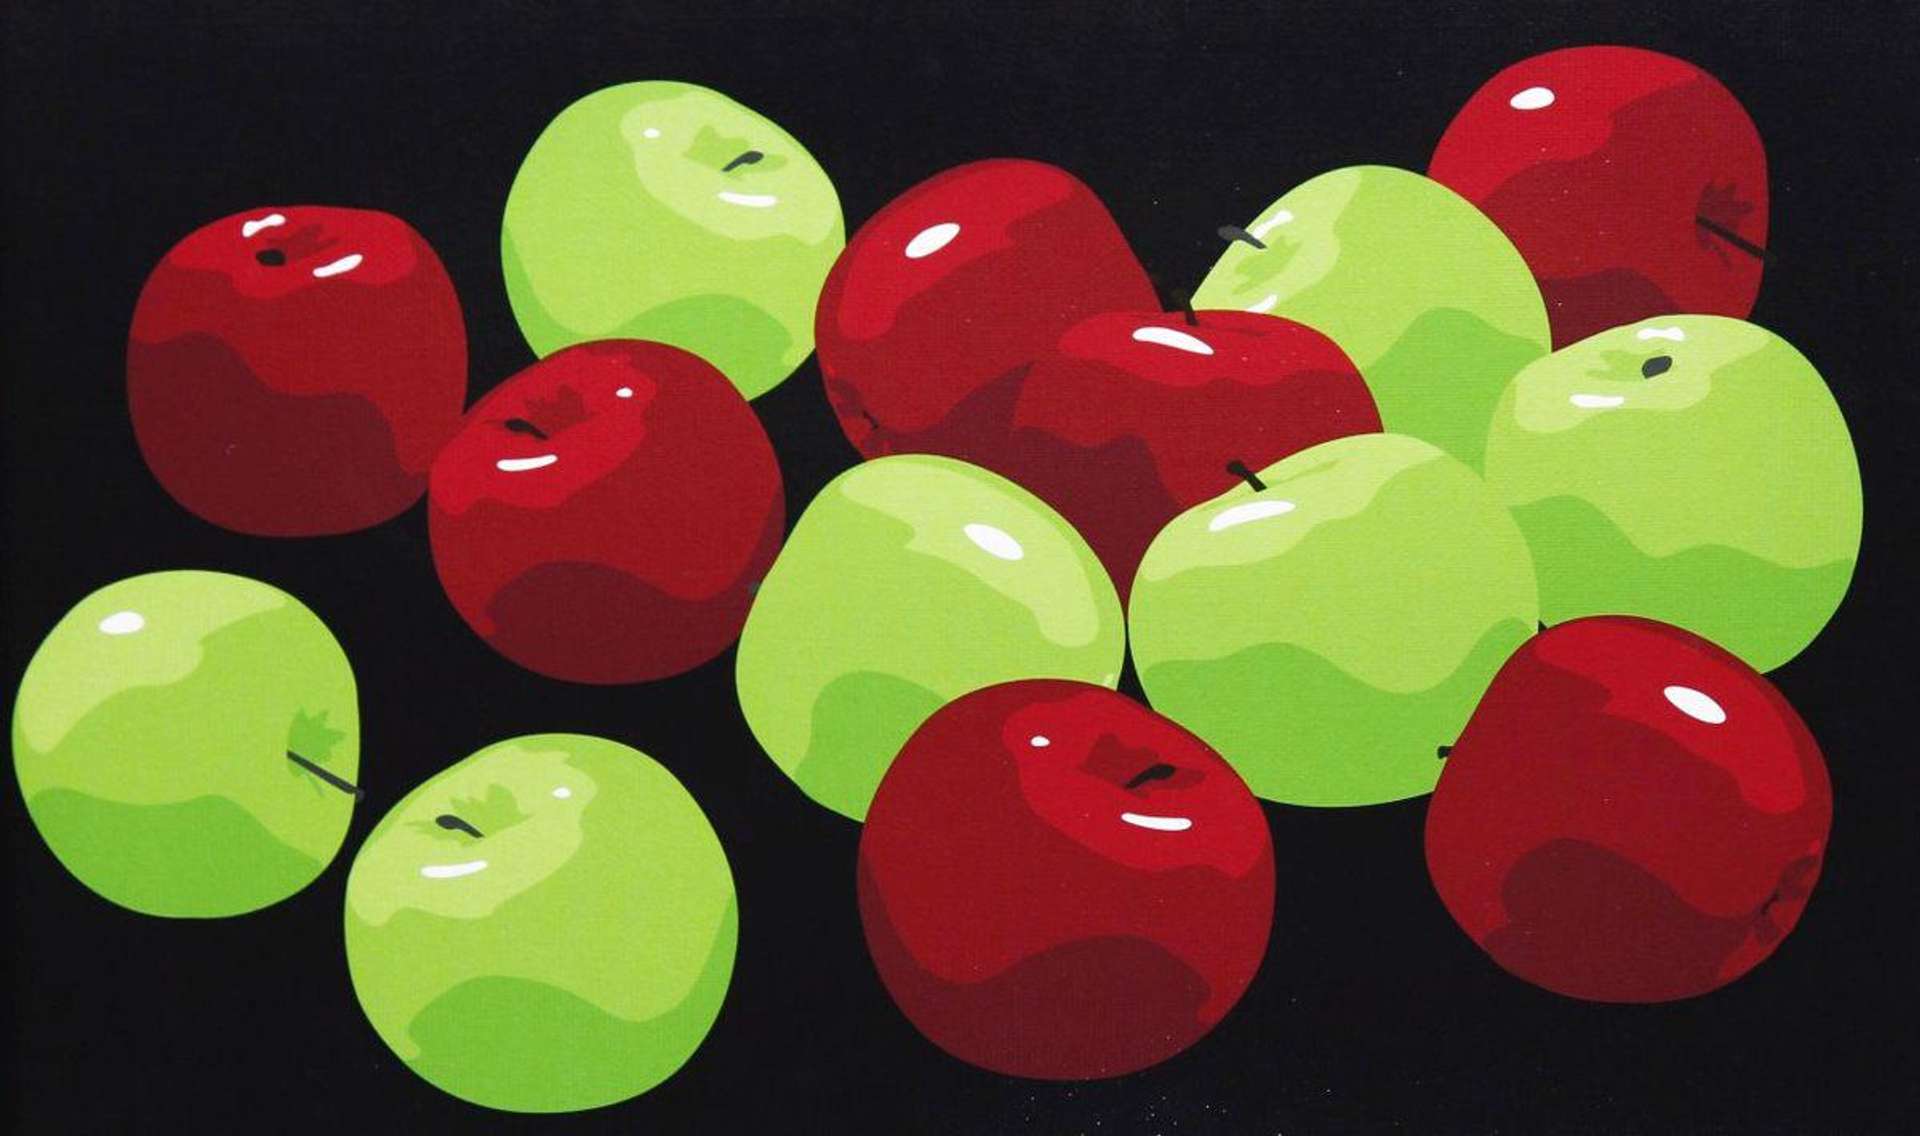 Julian Opie: Still Life With Red And Green Apples - Signed Print